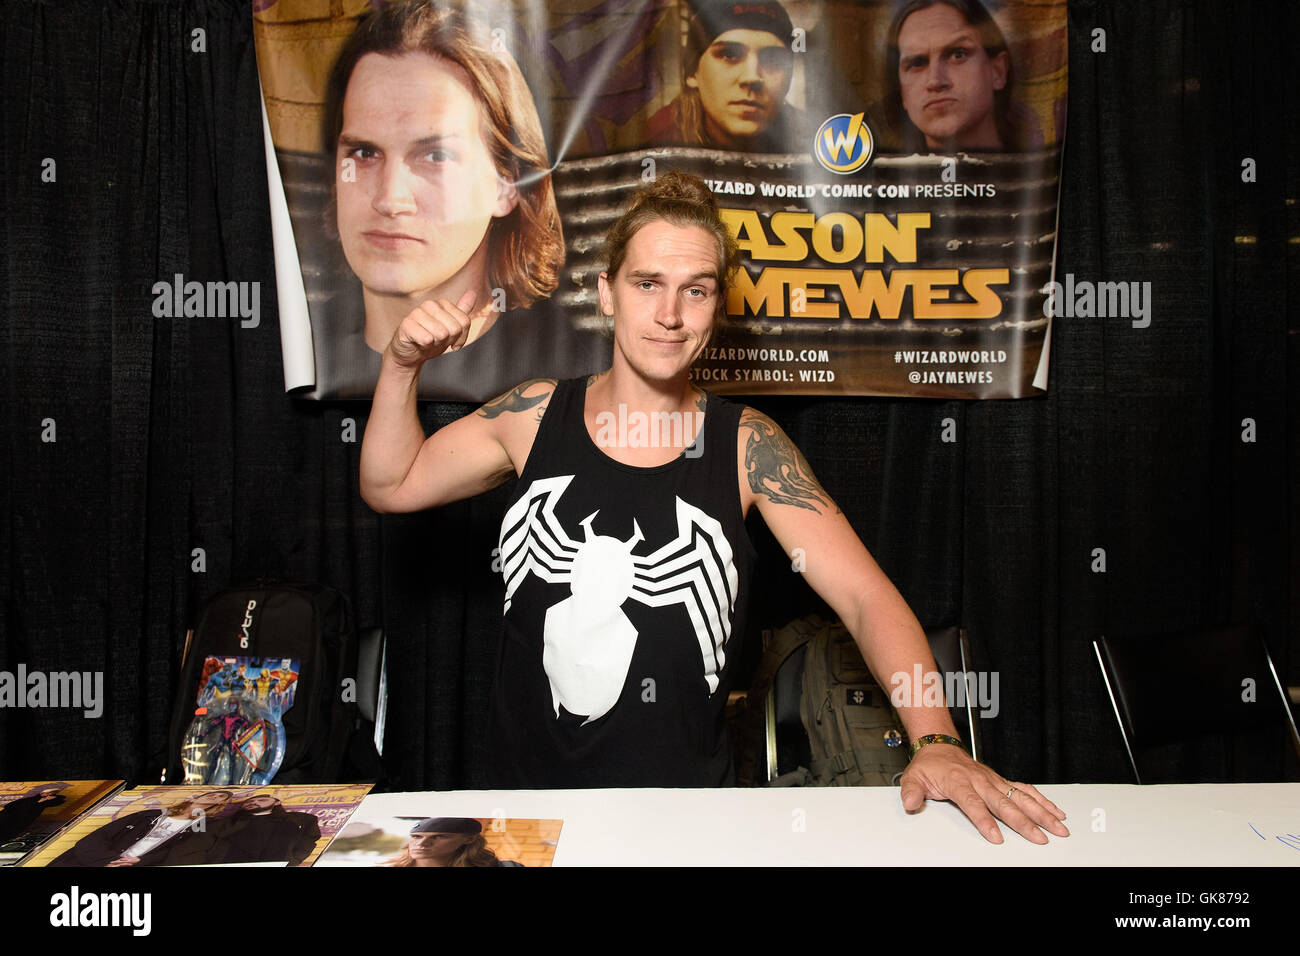 Chicago, Illinois, USA. 18th August 2016. Jason Mewes attends the Wizard World Chicago Comic Con at Donald E. Stephens Convention Center in Rosemont, IL. Credit:  Daniel Boczarski/Alamy Live News Stock Photo